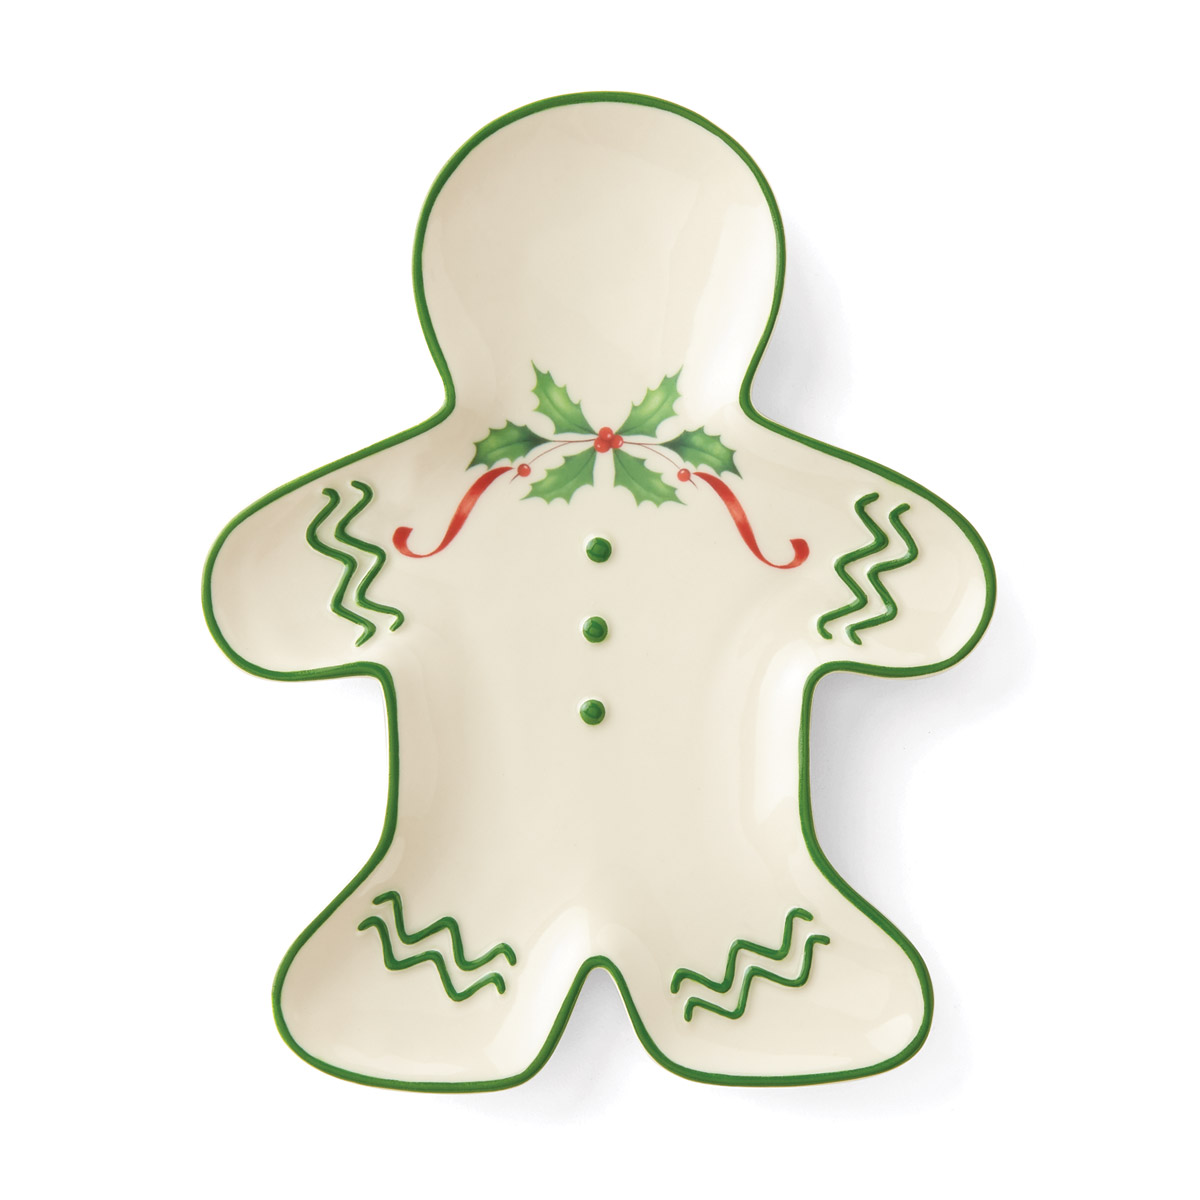 Lenox China Holiday Gingerbread Man Accent Plate, Single